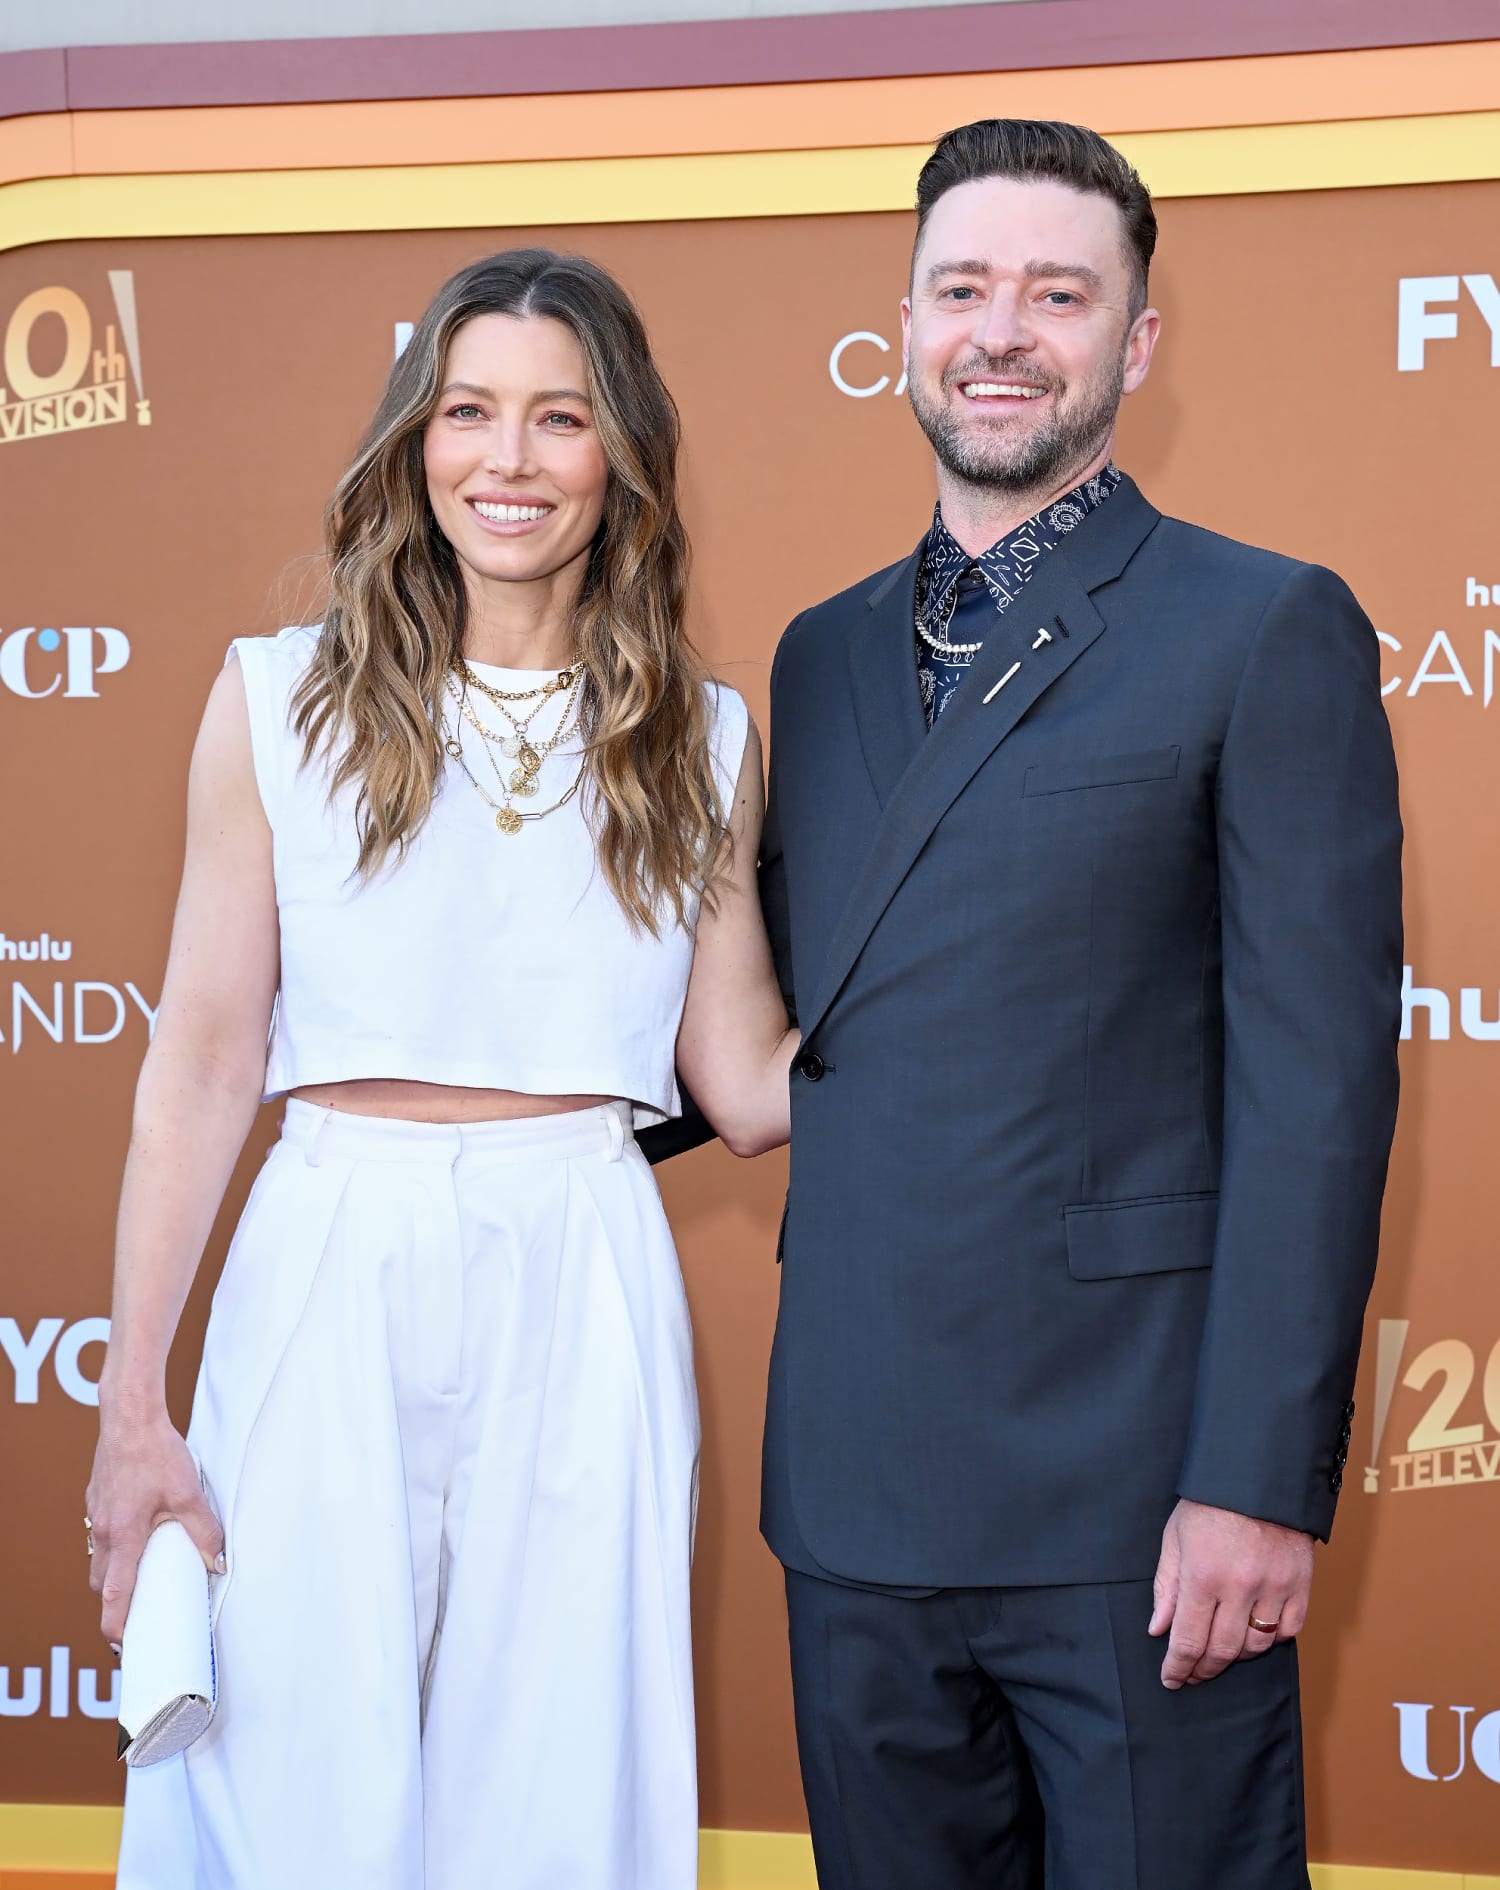 Justin Timberlake Confirms Welcoming Second Baby, Gives A Funny